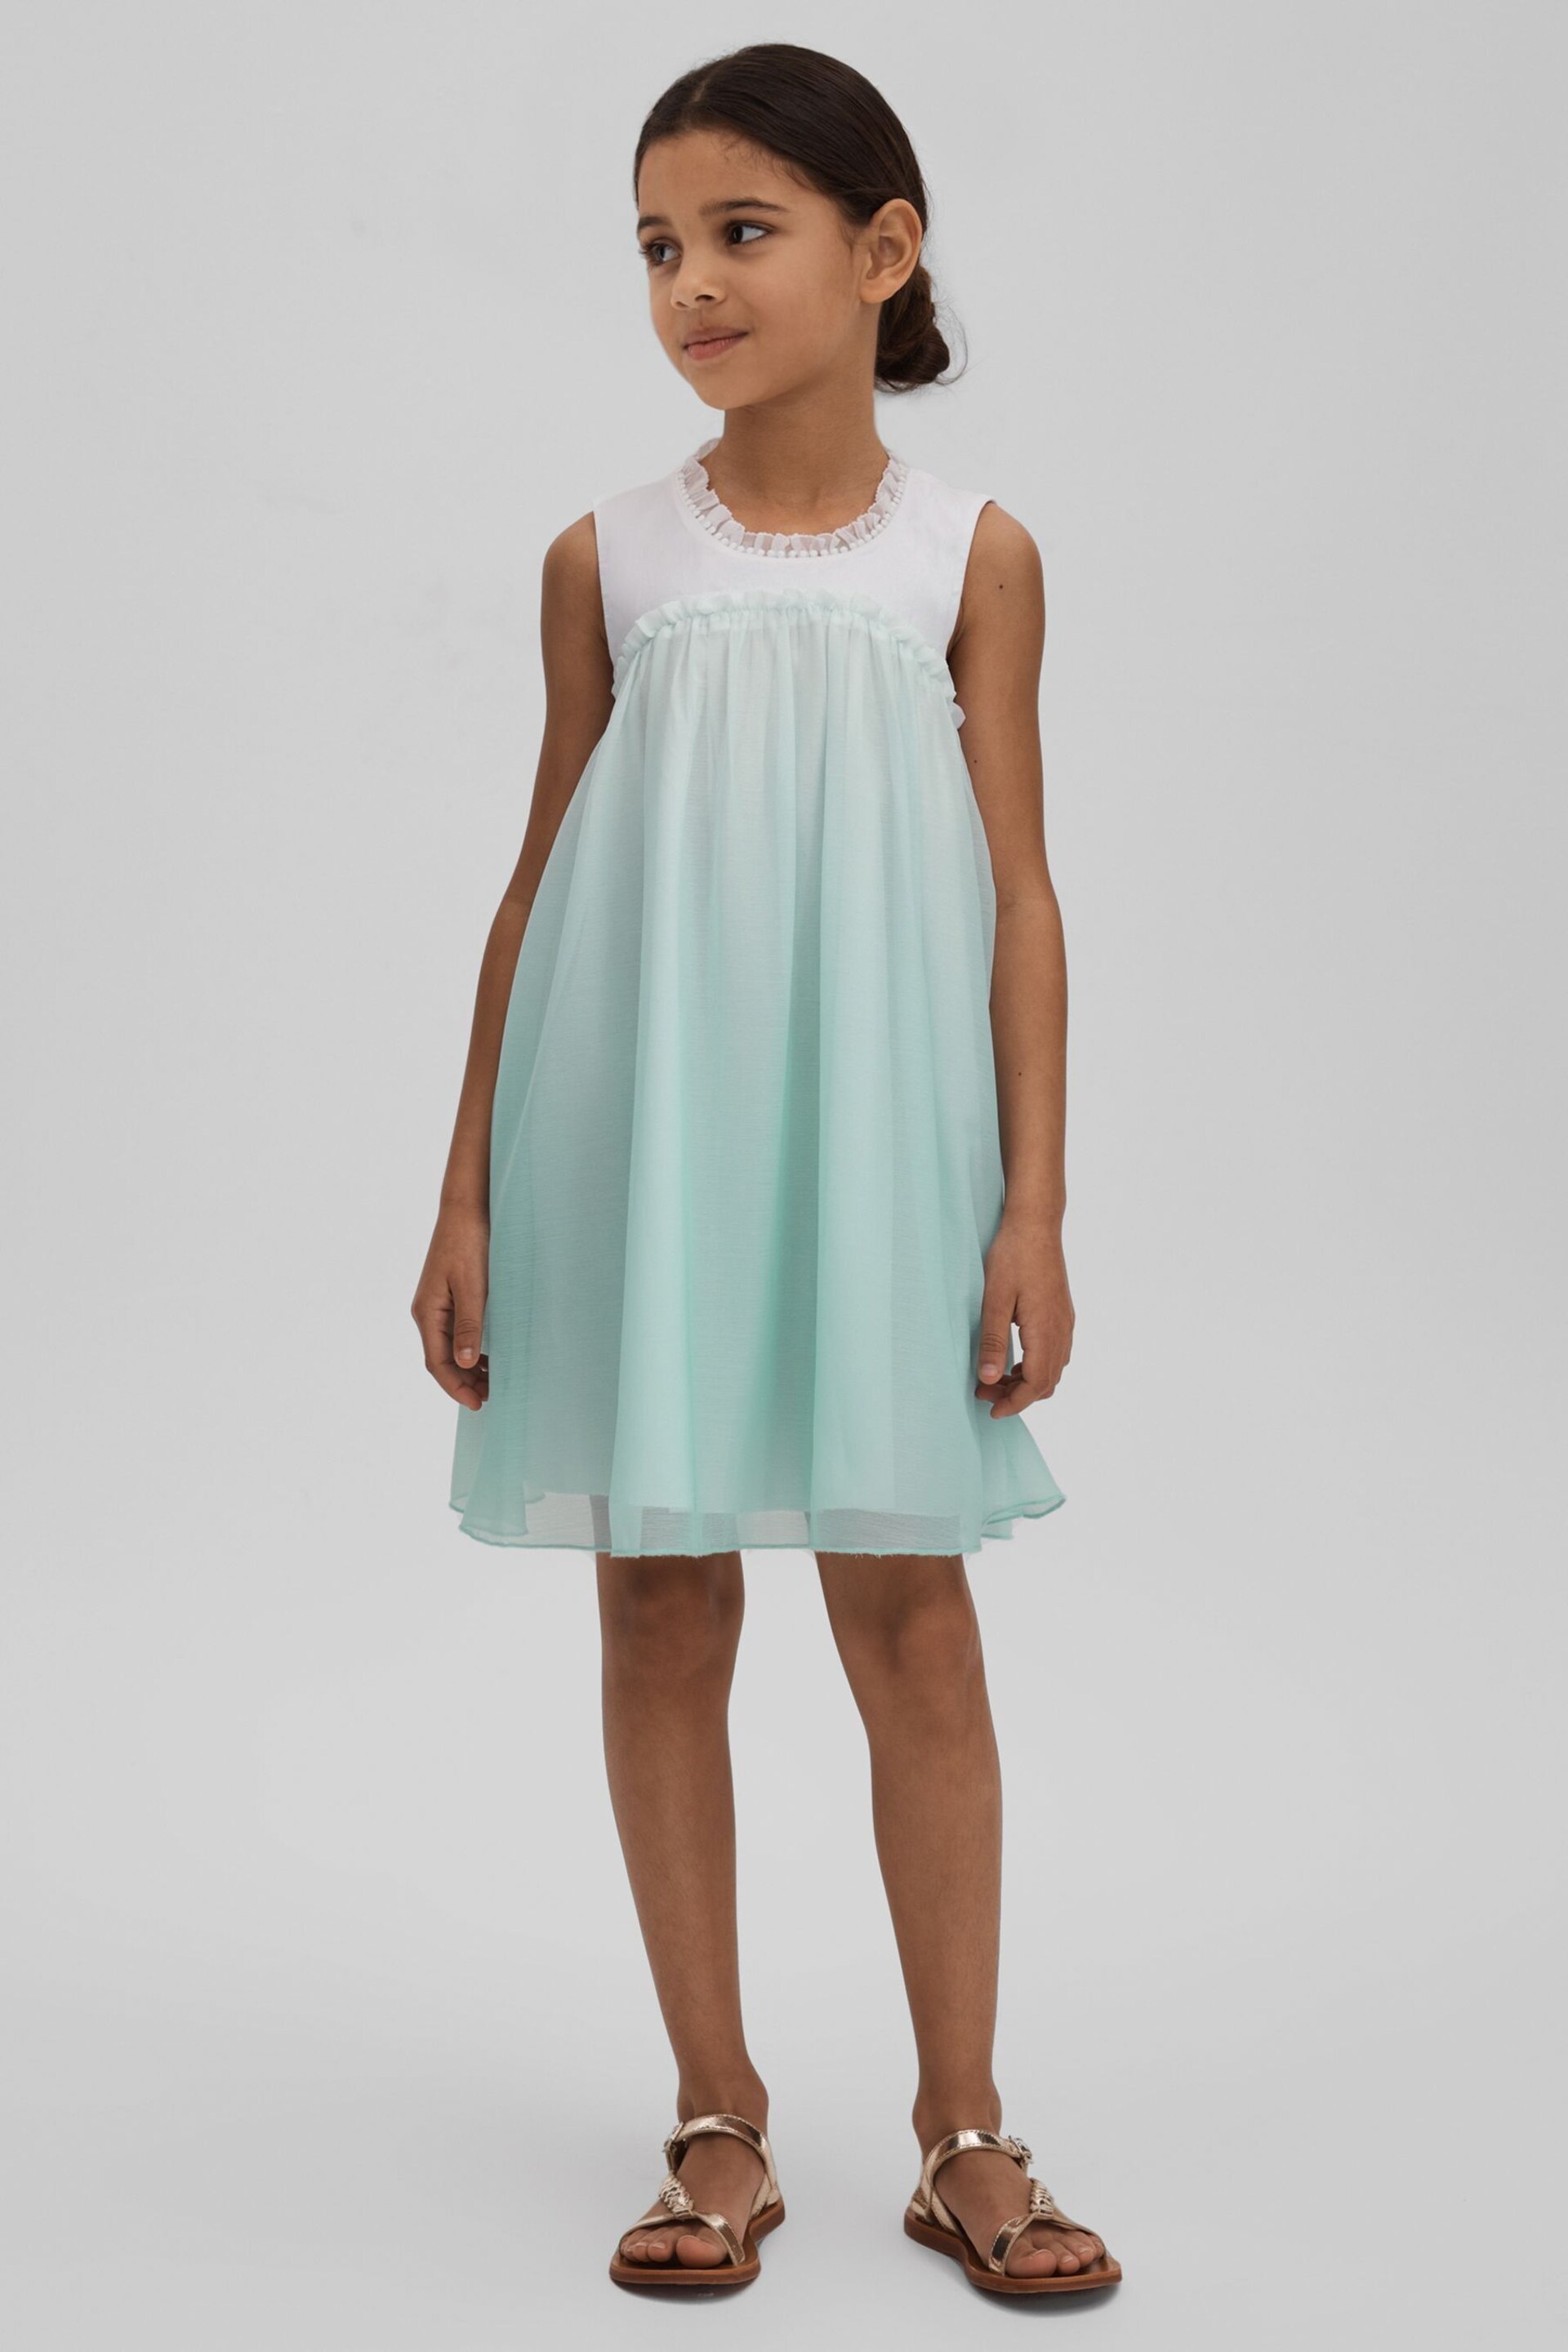 Reiss Blue Coco Teen Ombre Tulle Dress - Image 2 of 4